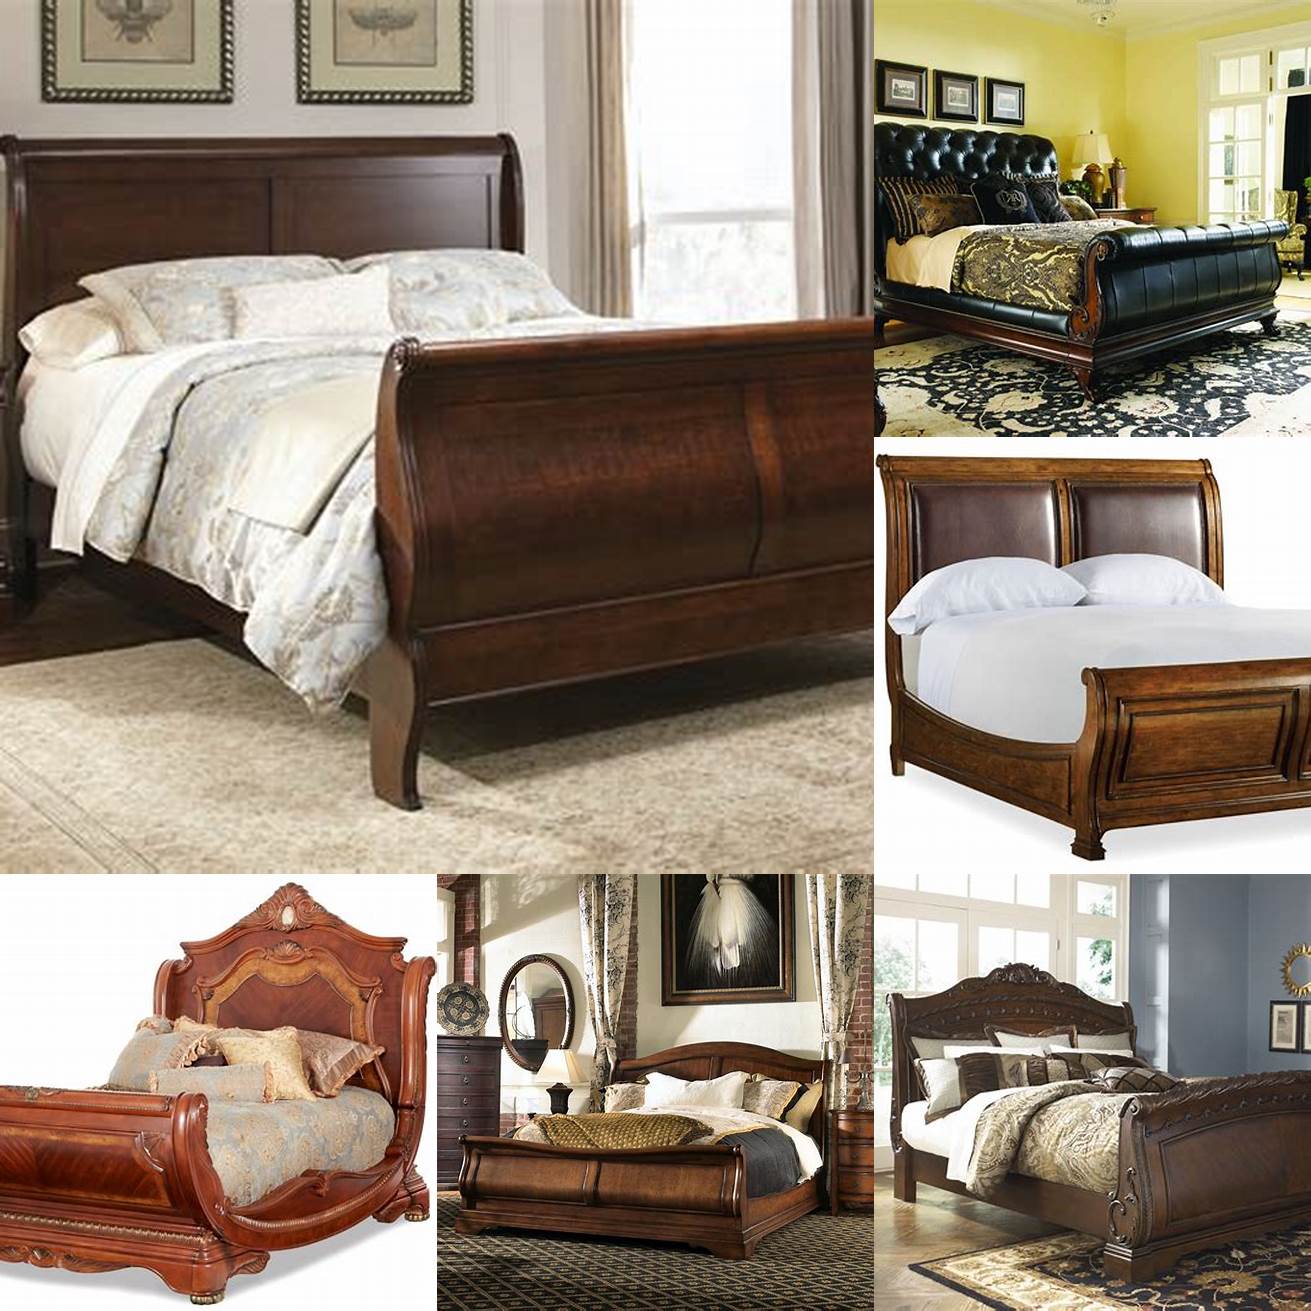 Image 6 A King Sleigh Bed with a canopy